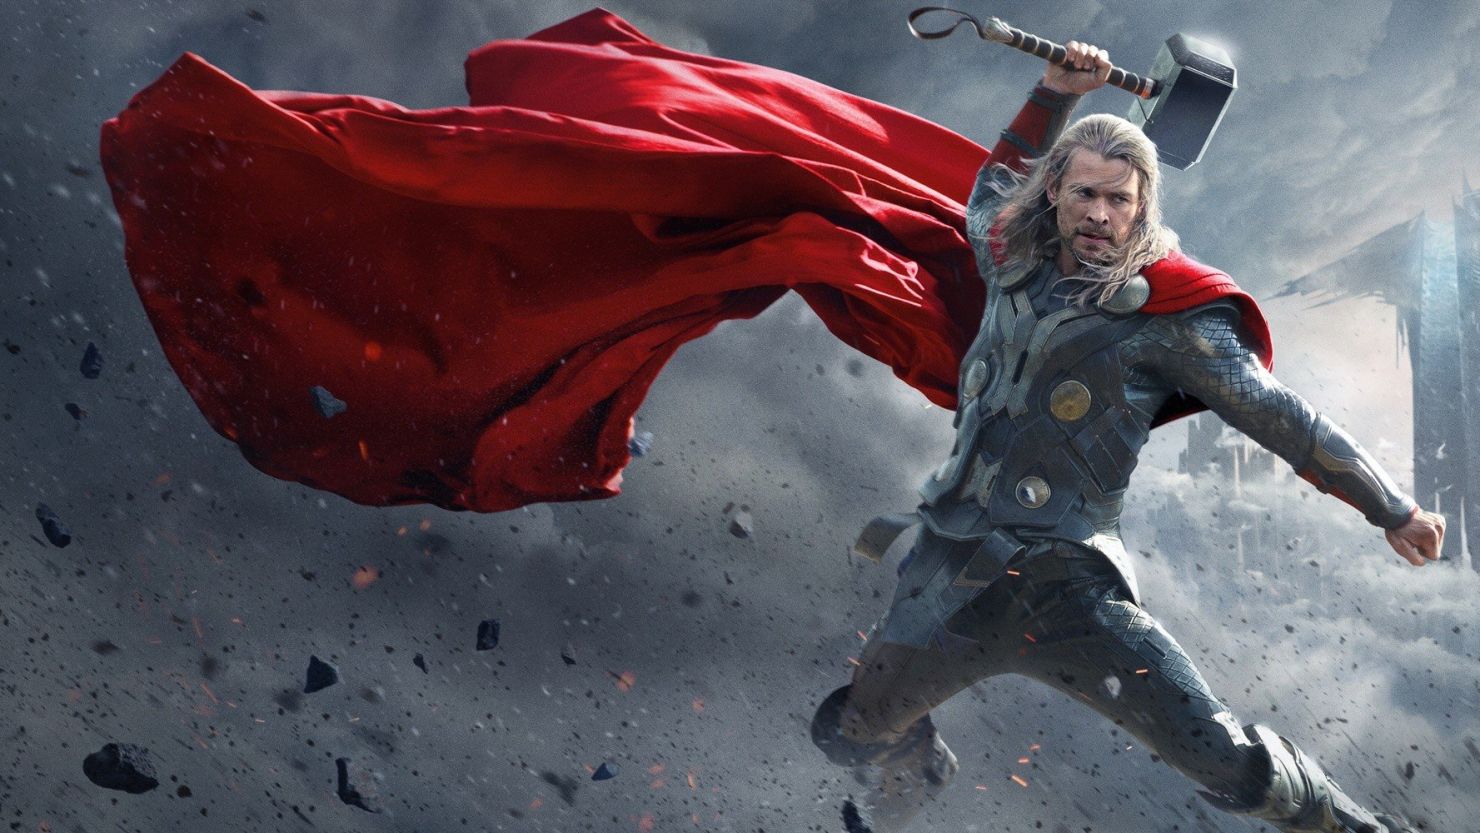 Chris Hemsworth stars as the Norse god Thor in the sequel "Thor: The Dark World."